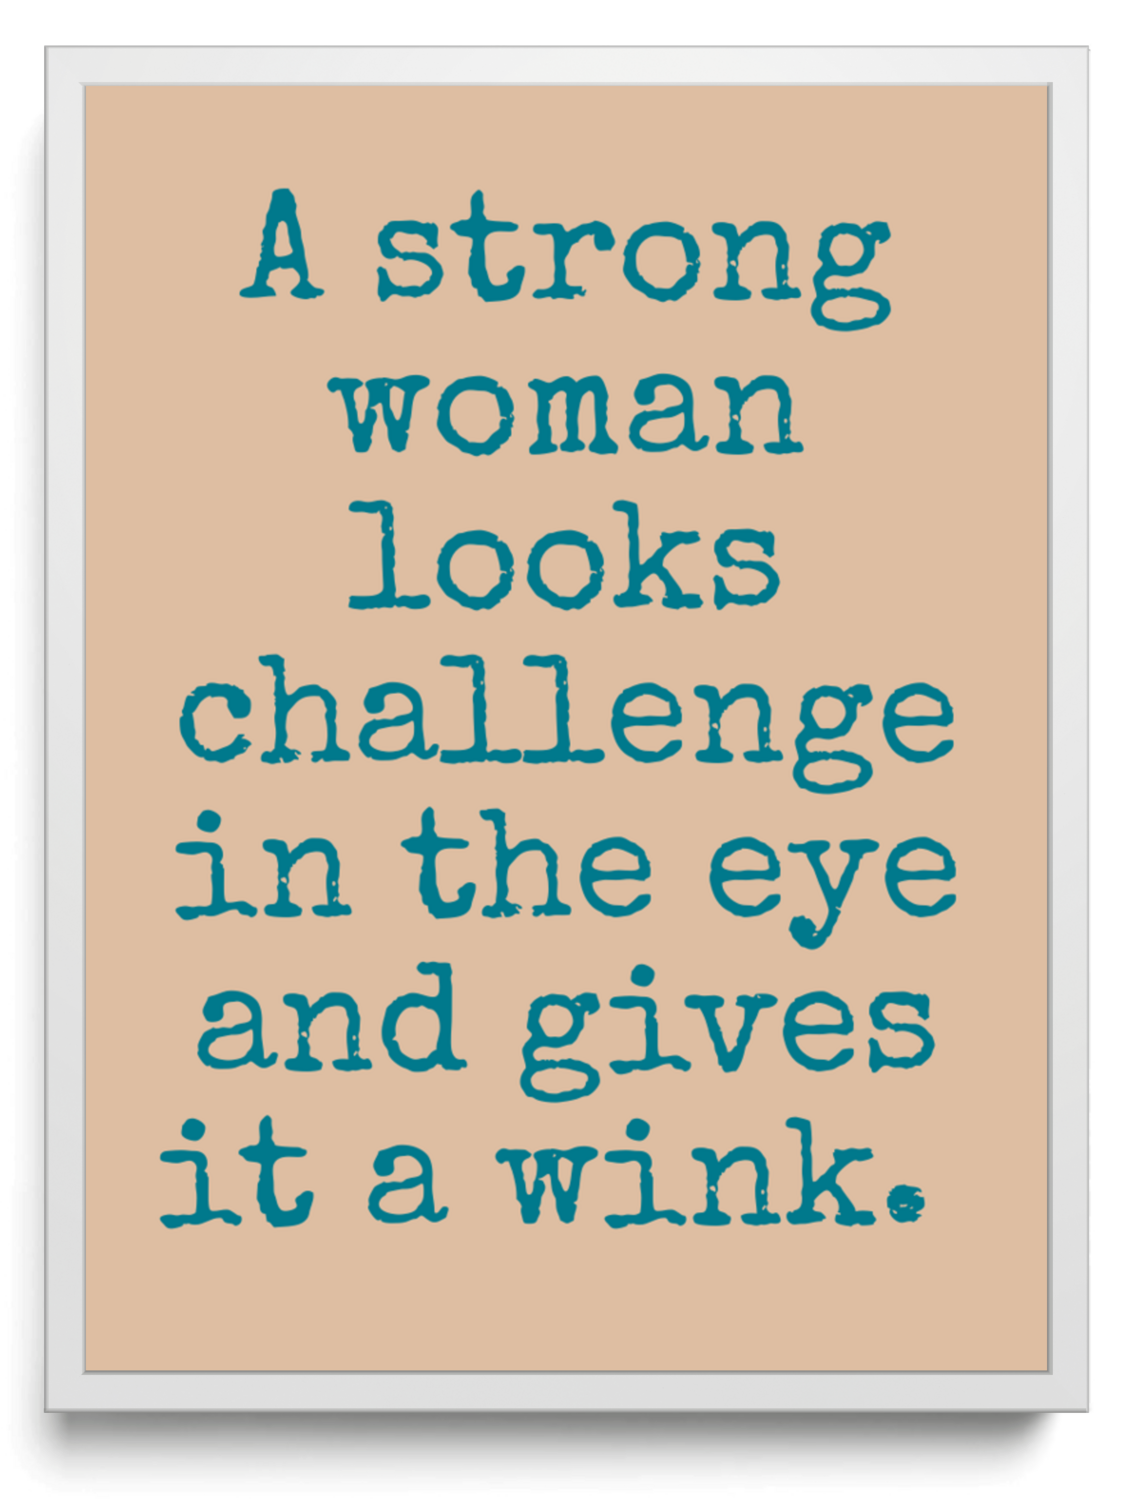 A strong woman looks challenge in the eye and gives it a wink framed typographic print